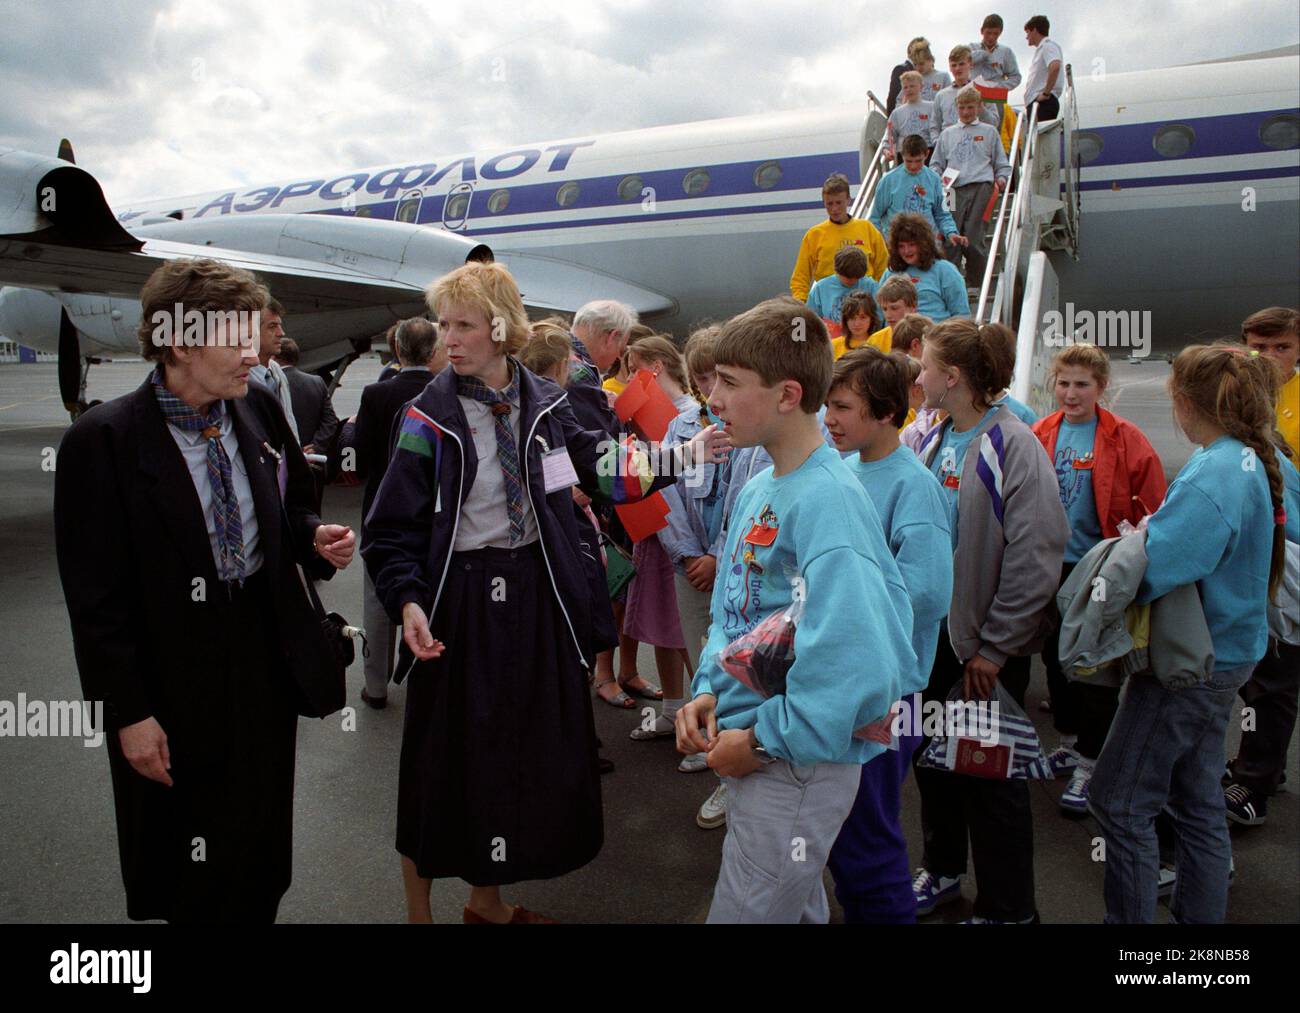 Oslo June 17, 1991. Children from Chernobyl are in Oslo to breathe radioactive-free air. Here from Fornebu when they leave the Aeroflot aircraft. Bjørg Walstad (t.v.) and Bodil Tærud receive Chernobyl children. The Norwegian Scout Association is hosts for the children who will be in Norway for 1 month. Photo: Morten Hvaal / NTB / NTB Stock Photo